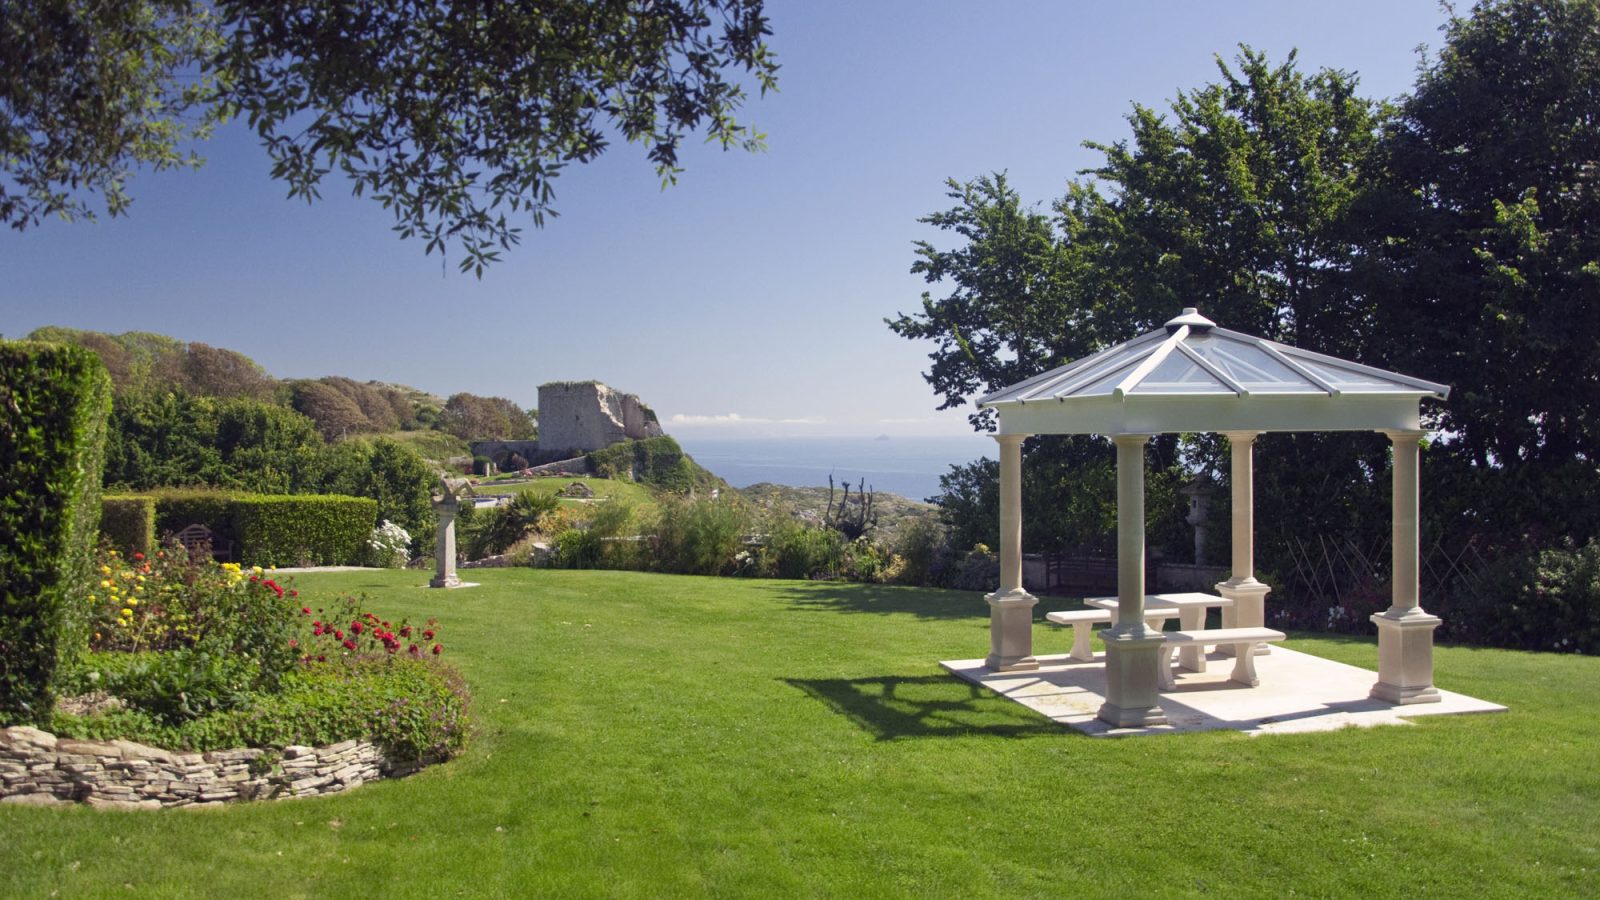  The Castle on the Coast - kate & tom's Large Holiday Homes